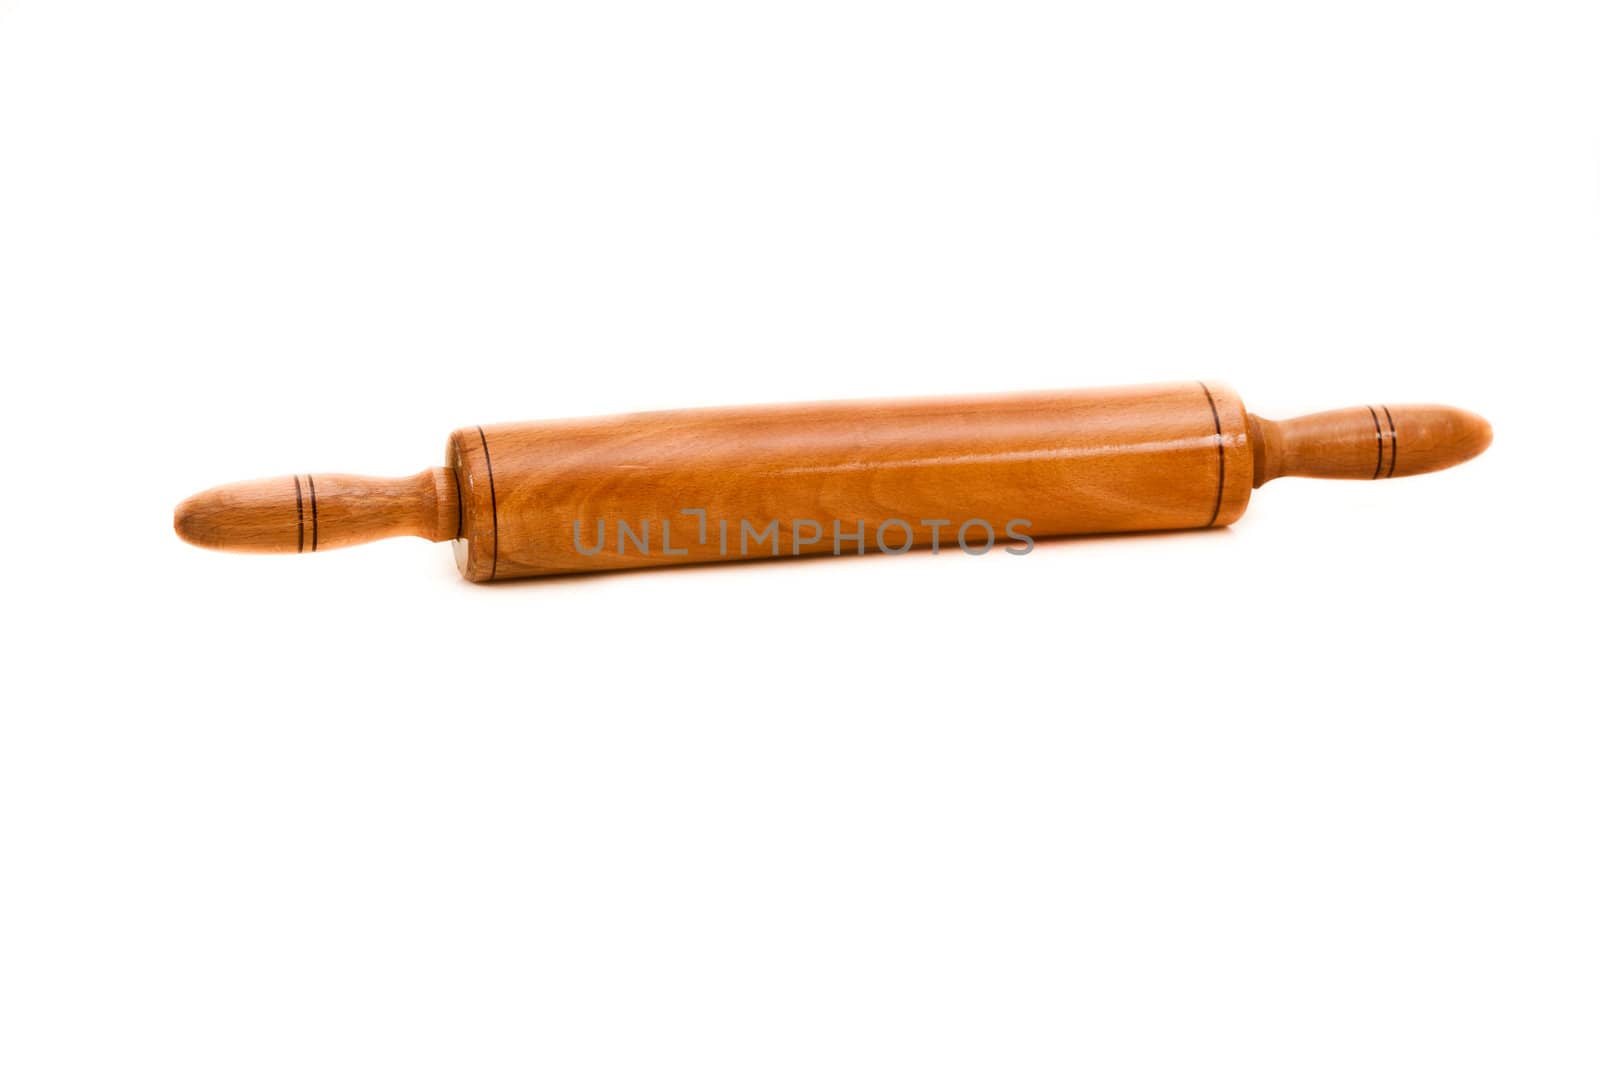 Rolling pin tool kitchen cooking cuisine wooden